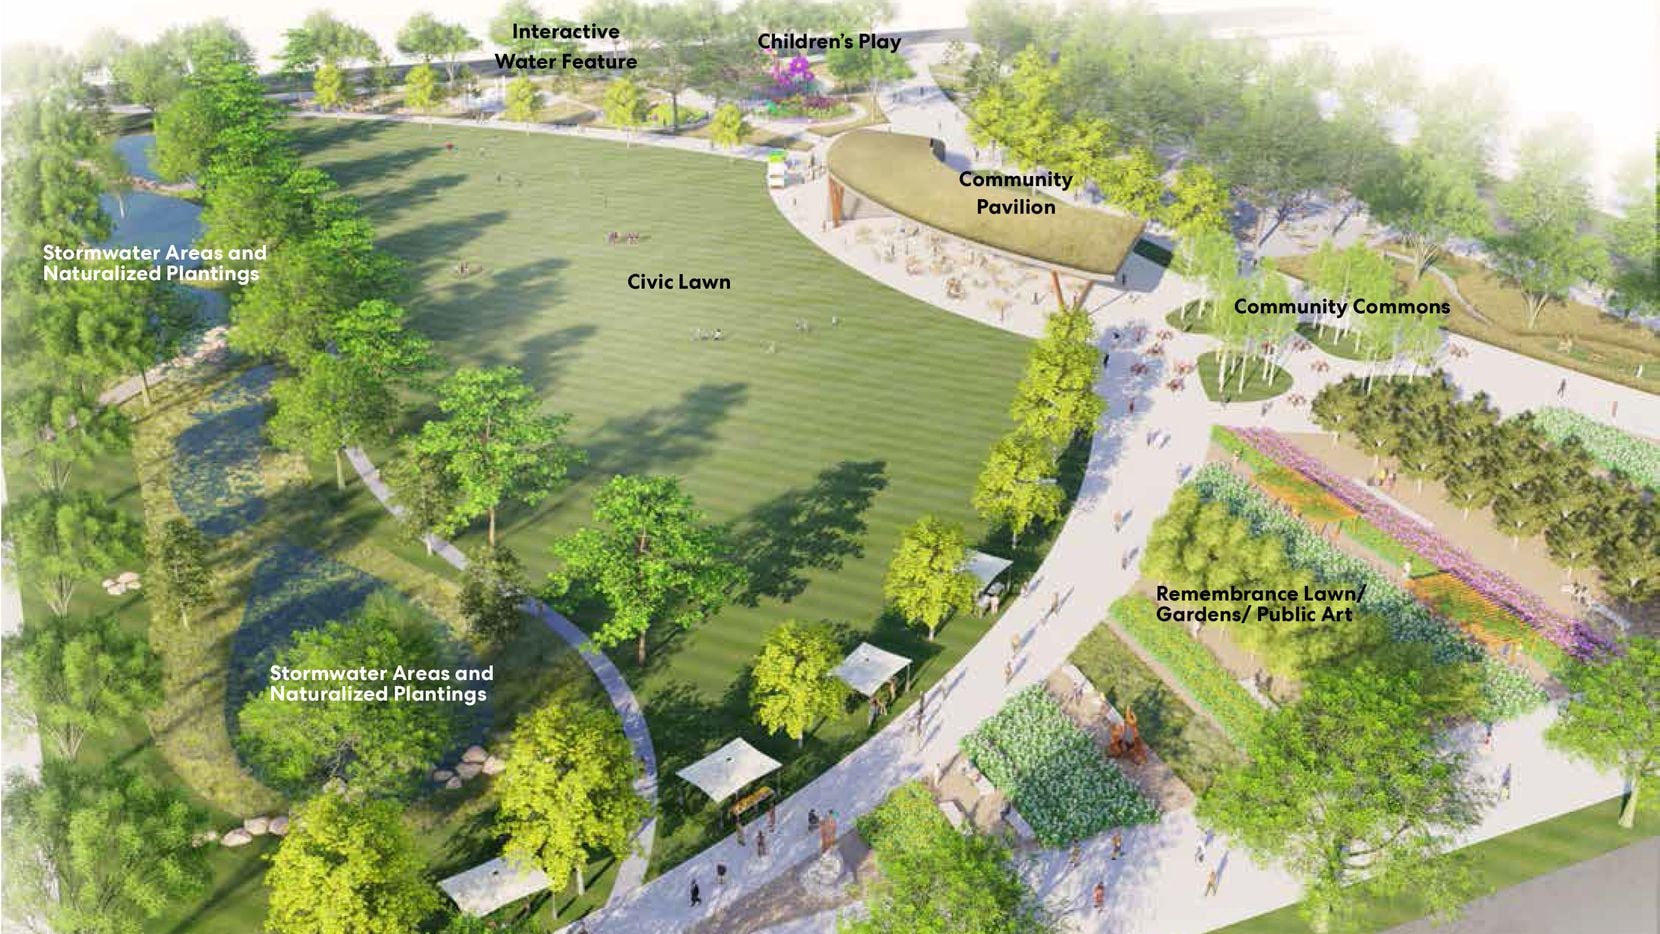 The Dallas City Council on Wednesday will vote on the updated master plan for its 277-acre...